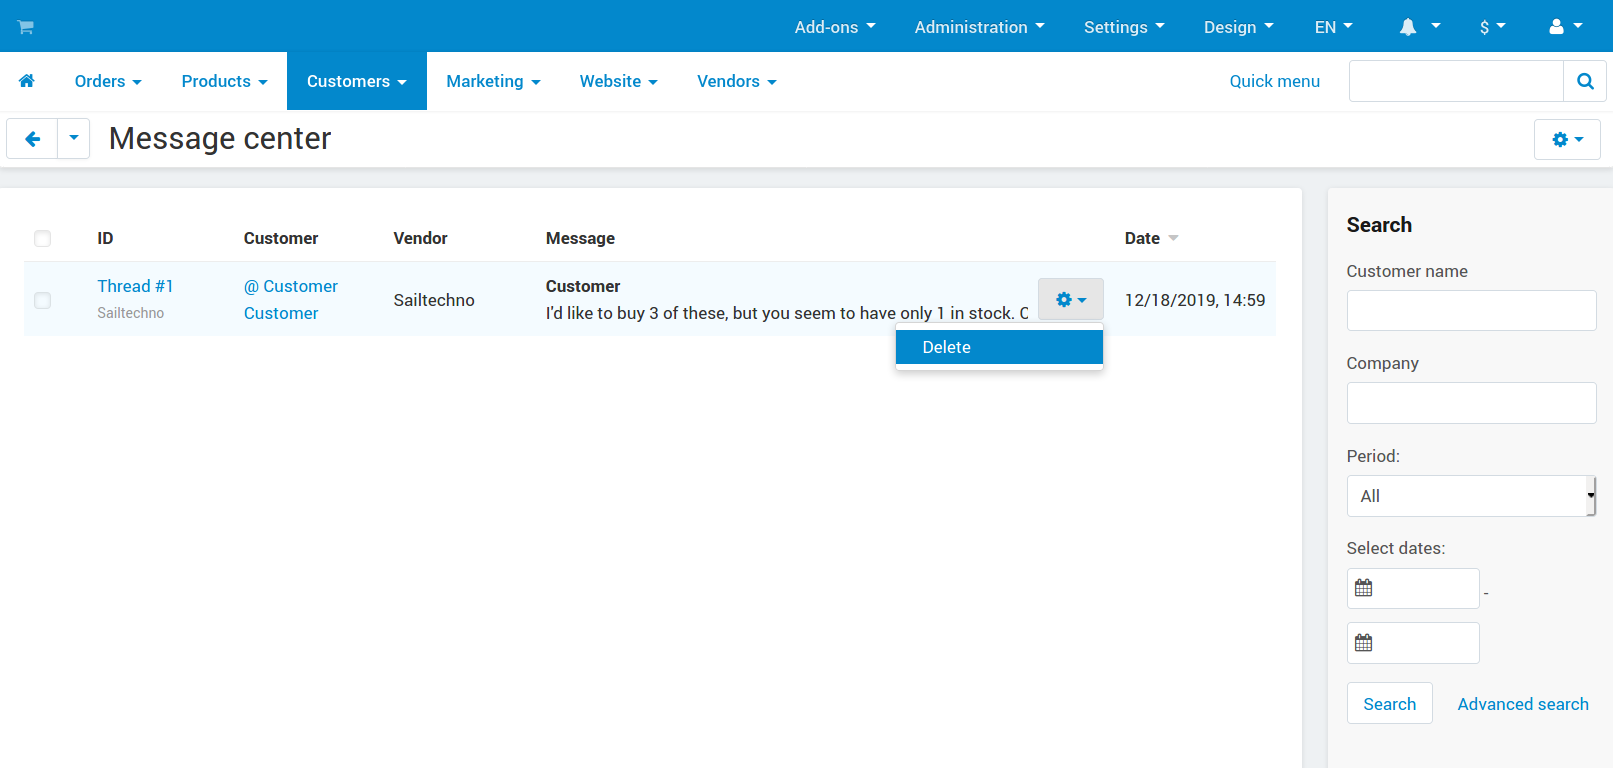 Message center in the admin panel.